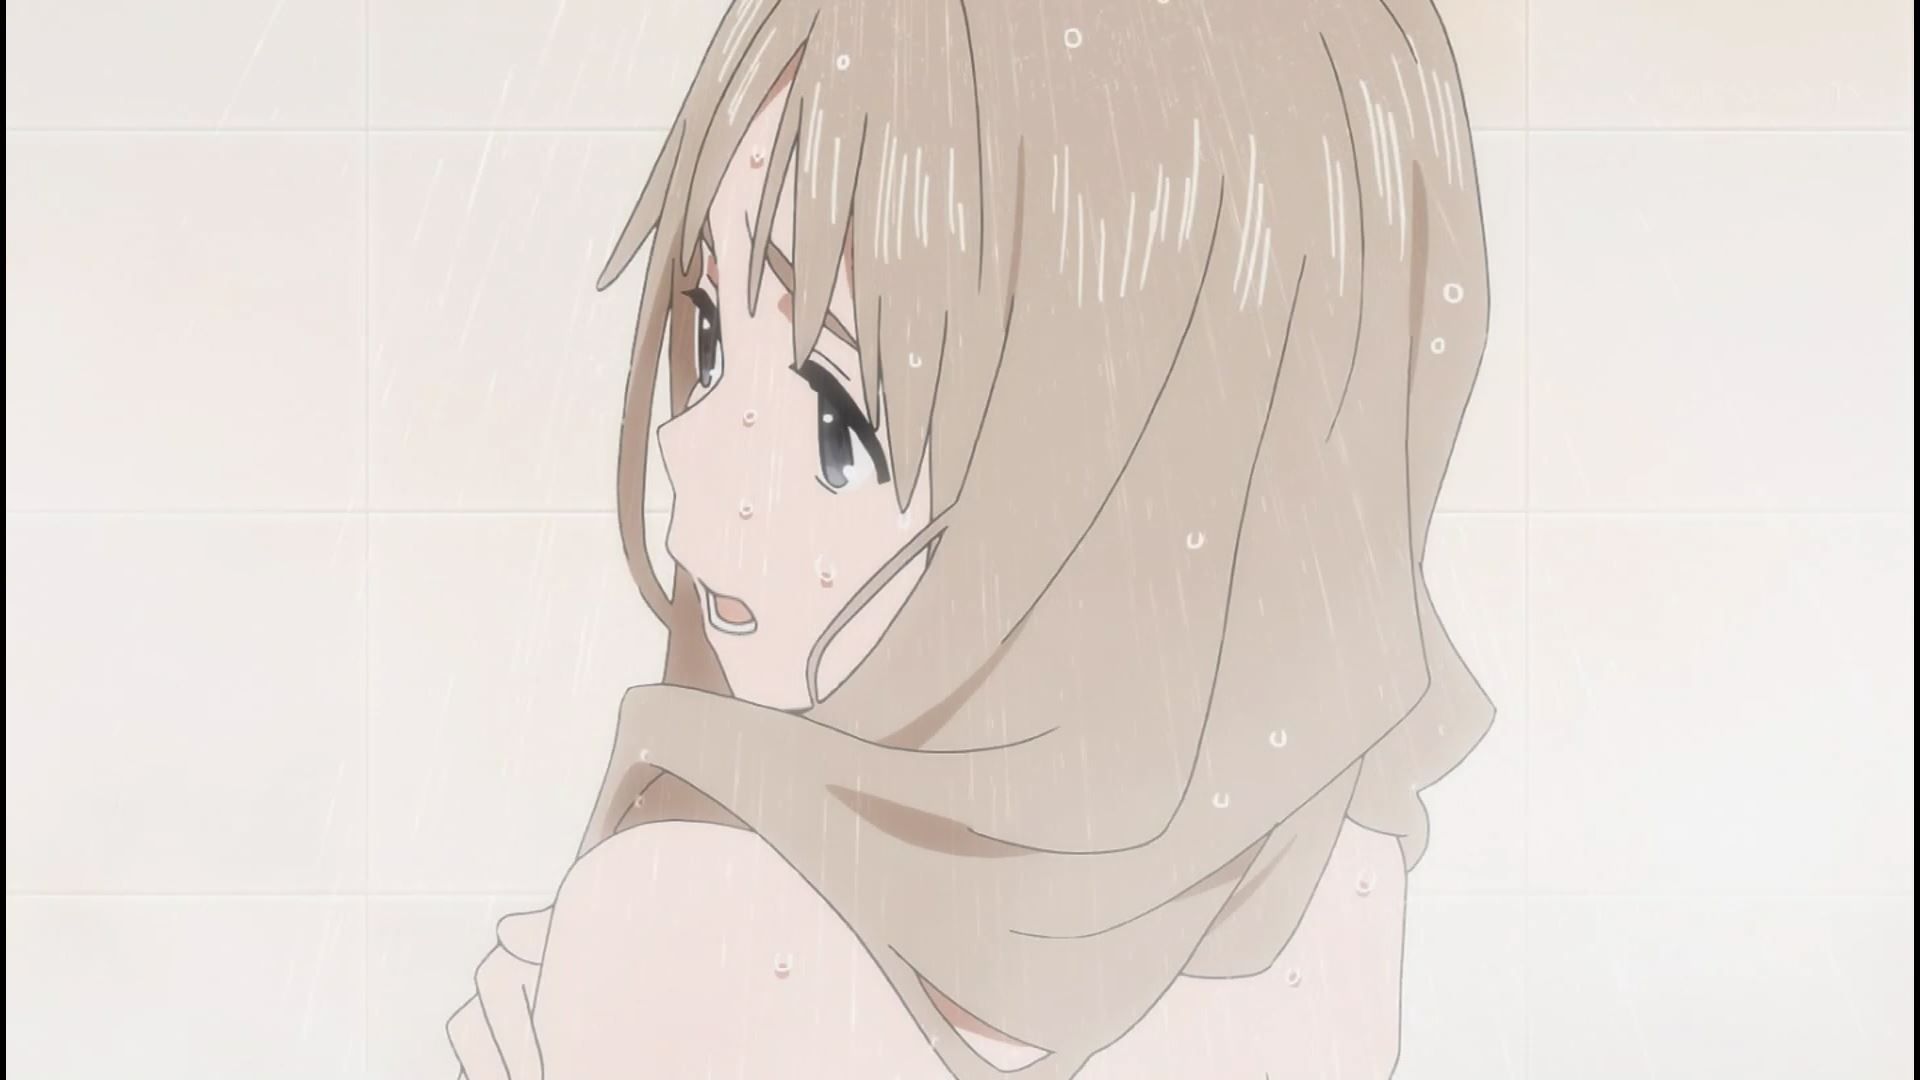 such as the bath scene and the girl's suit melts in anime ' darling in the Franc kiss ' 8 story! 12